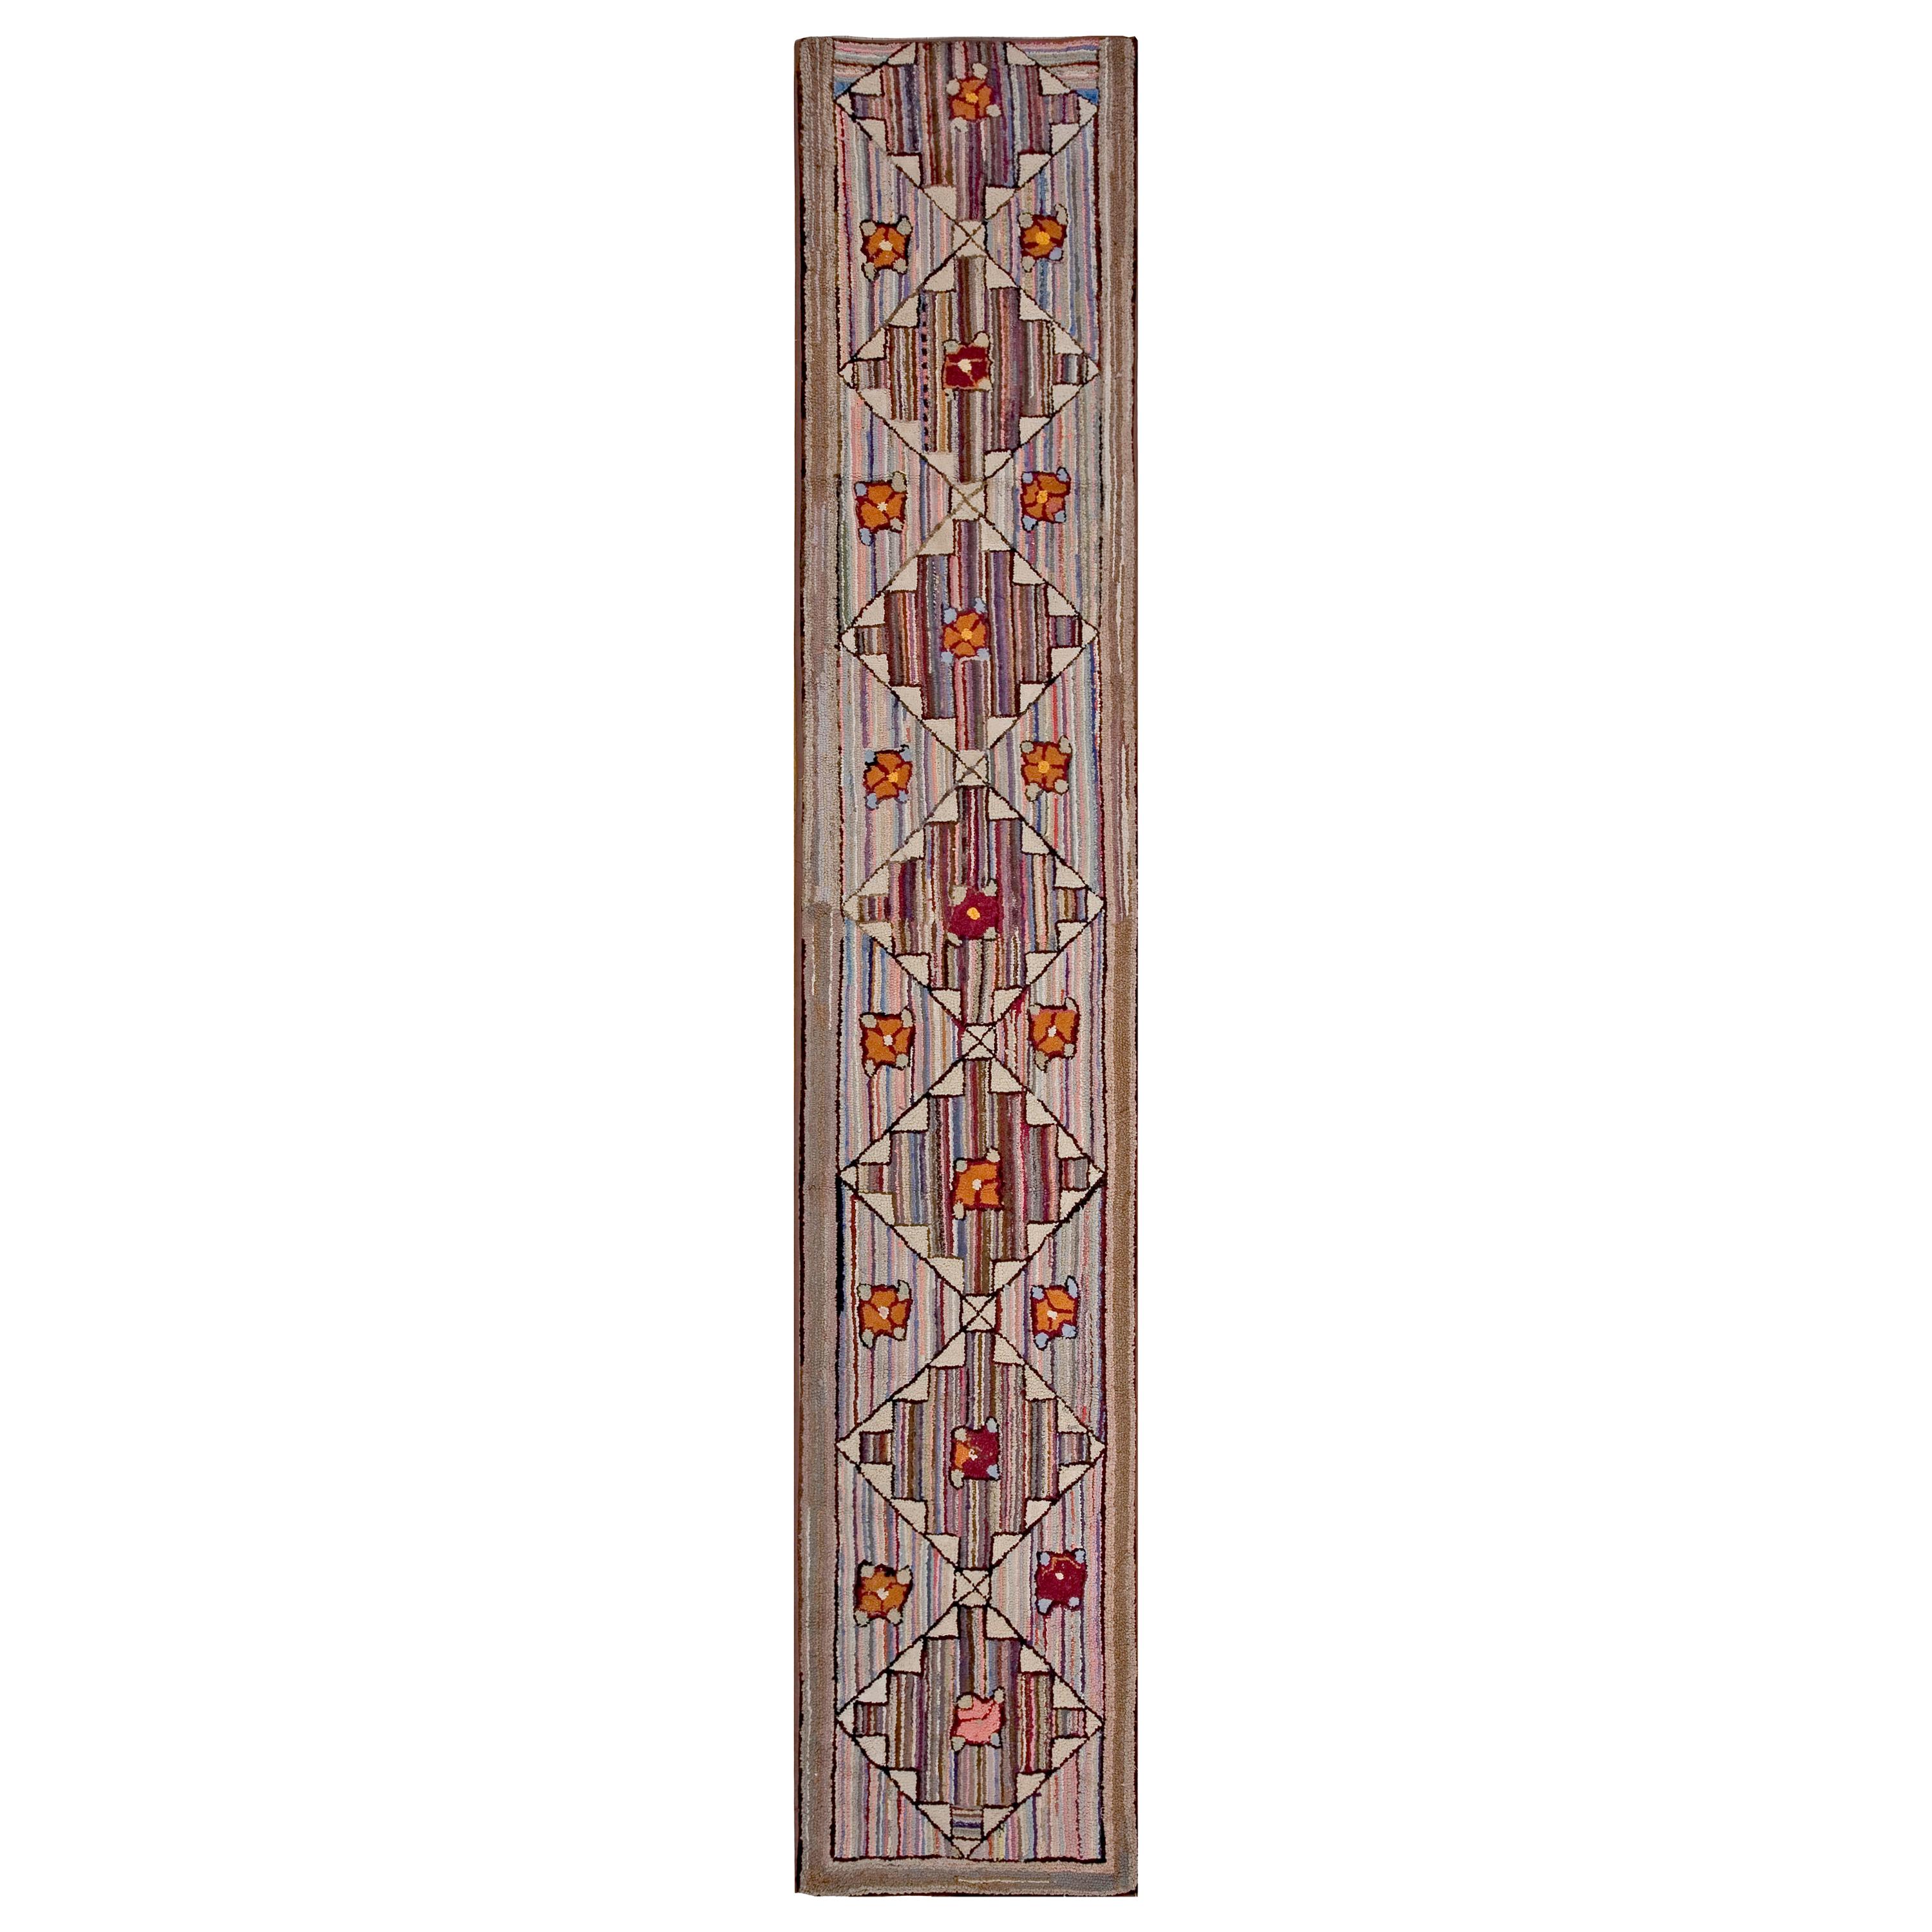 Early 20th Century Geometrical American Hooked Rug ( 2'4" x 12'10" - 71 x 391 )